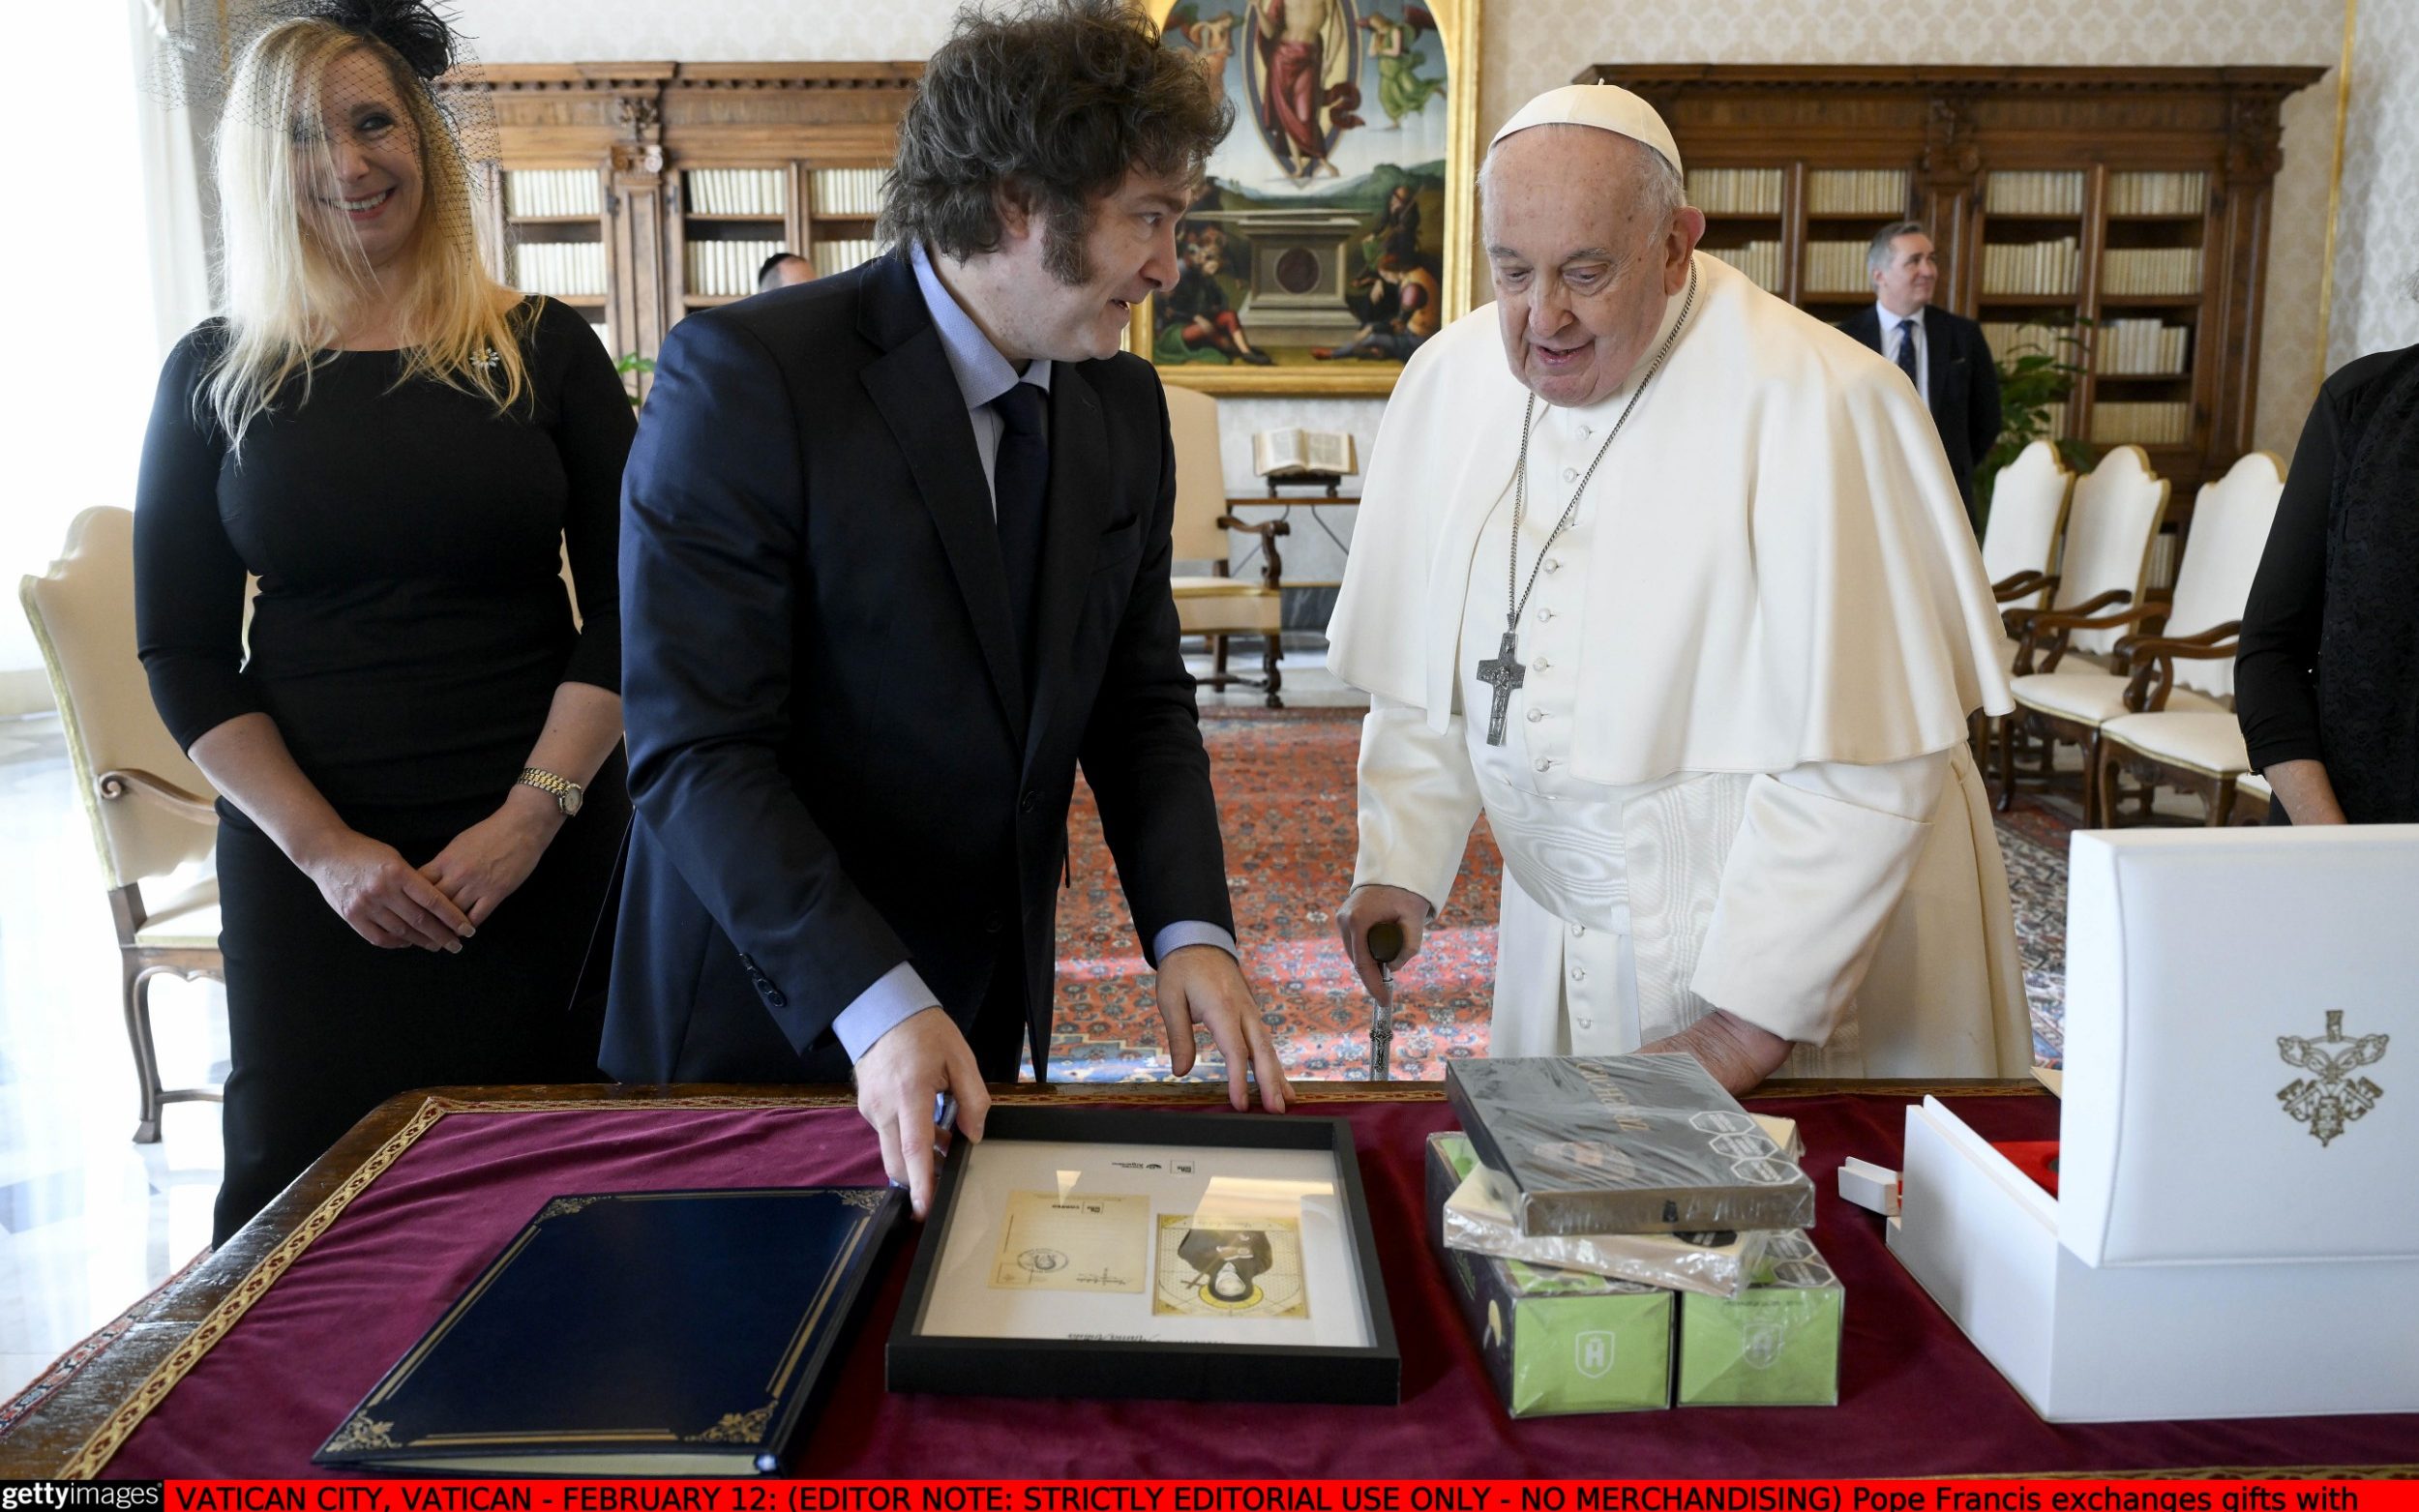 argentine president makes peace with sweet offering to countryman pope francis